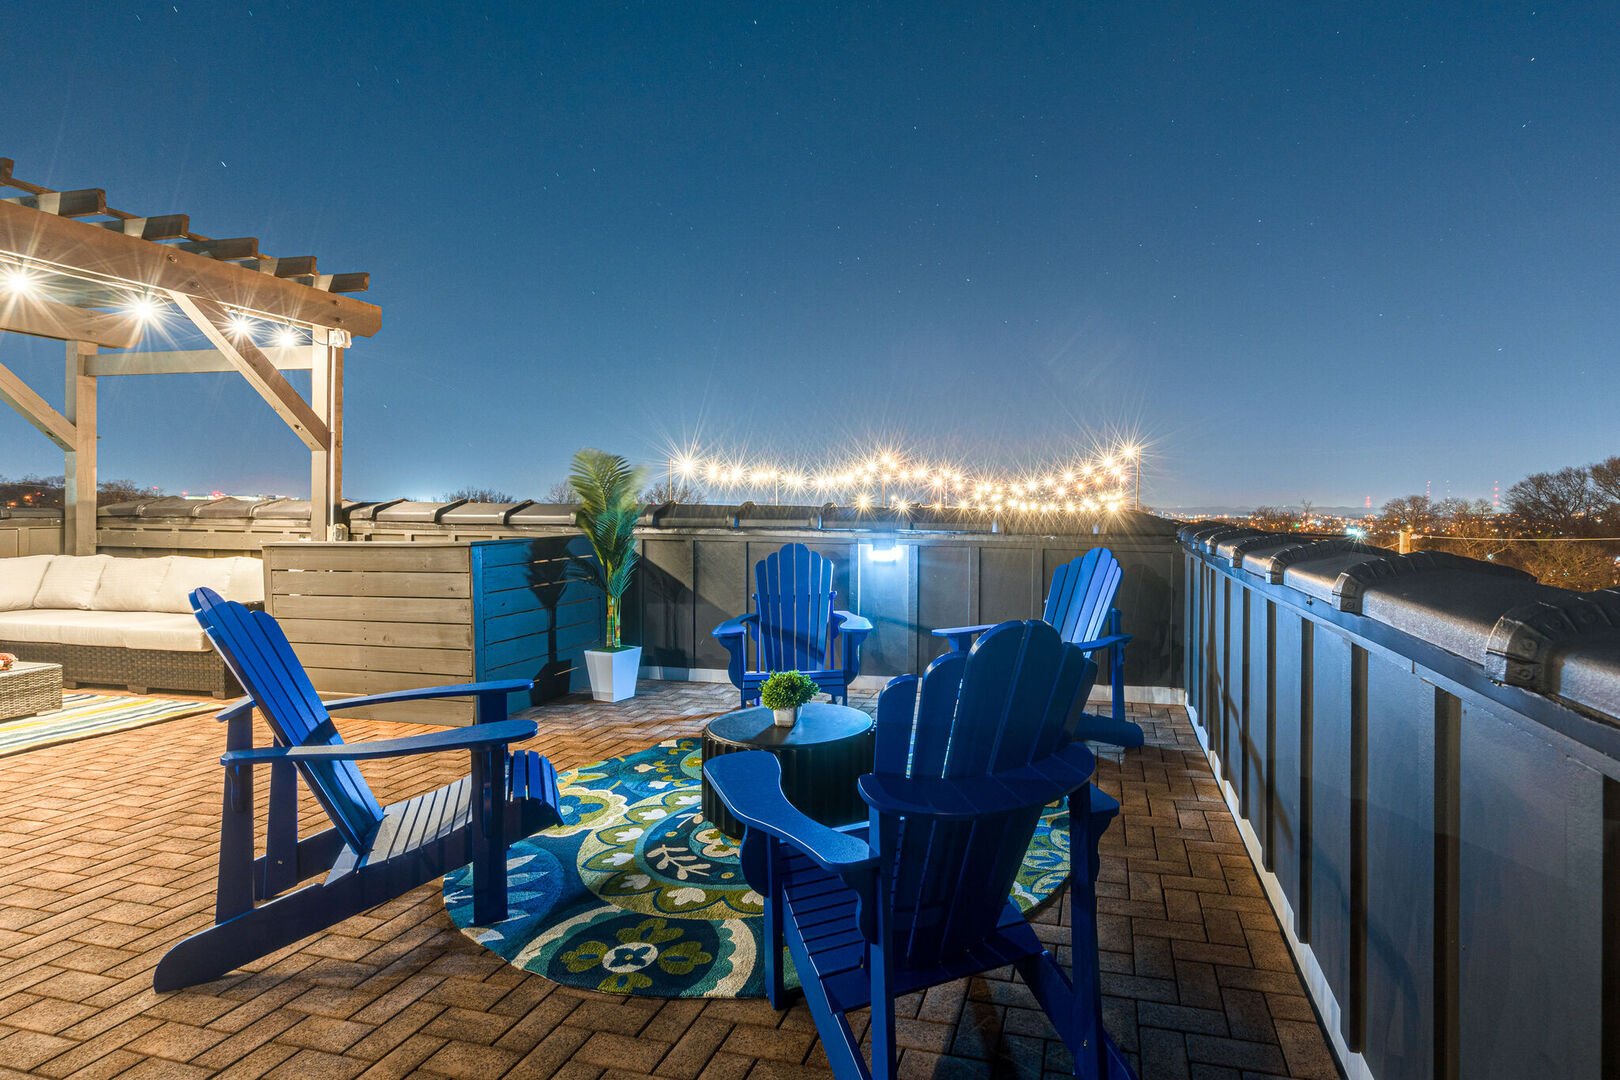 UPPER DECK with hot tub, lounge chairs and views